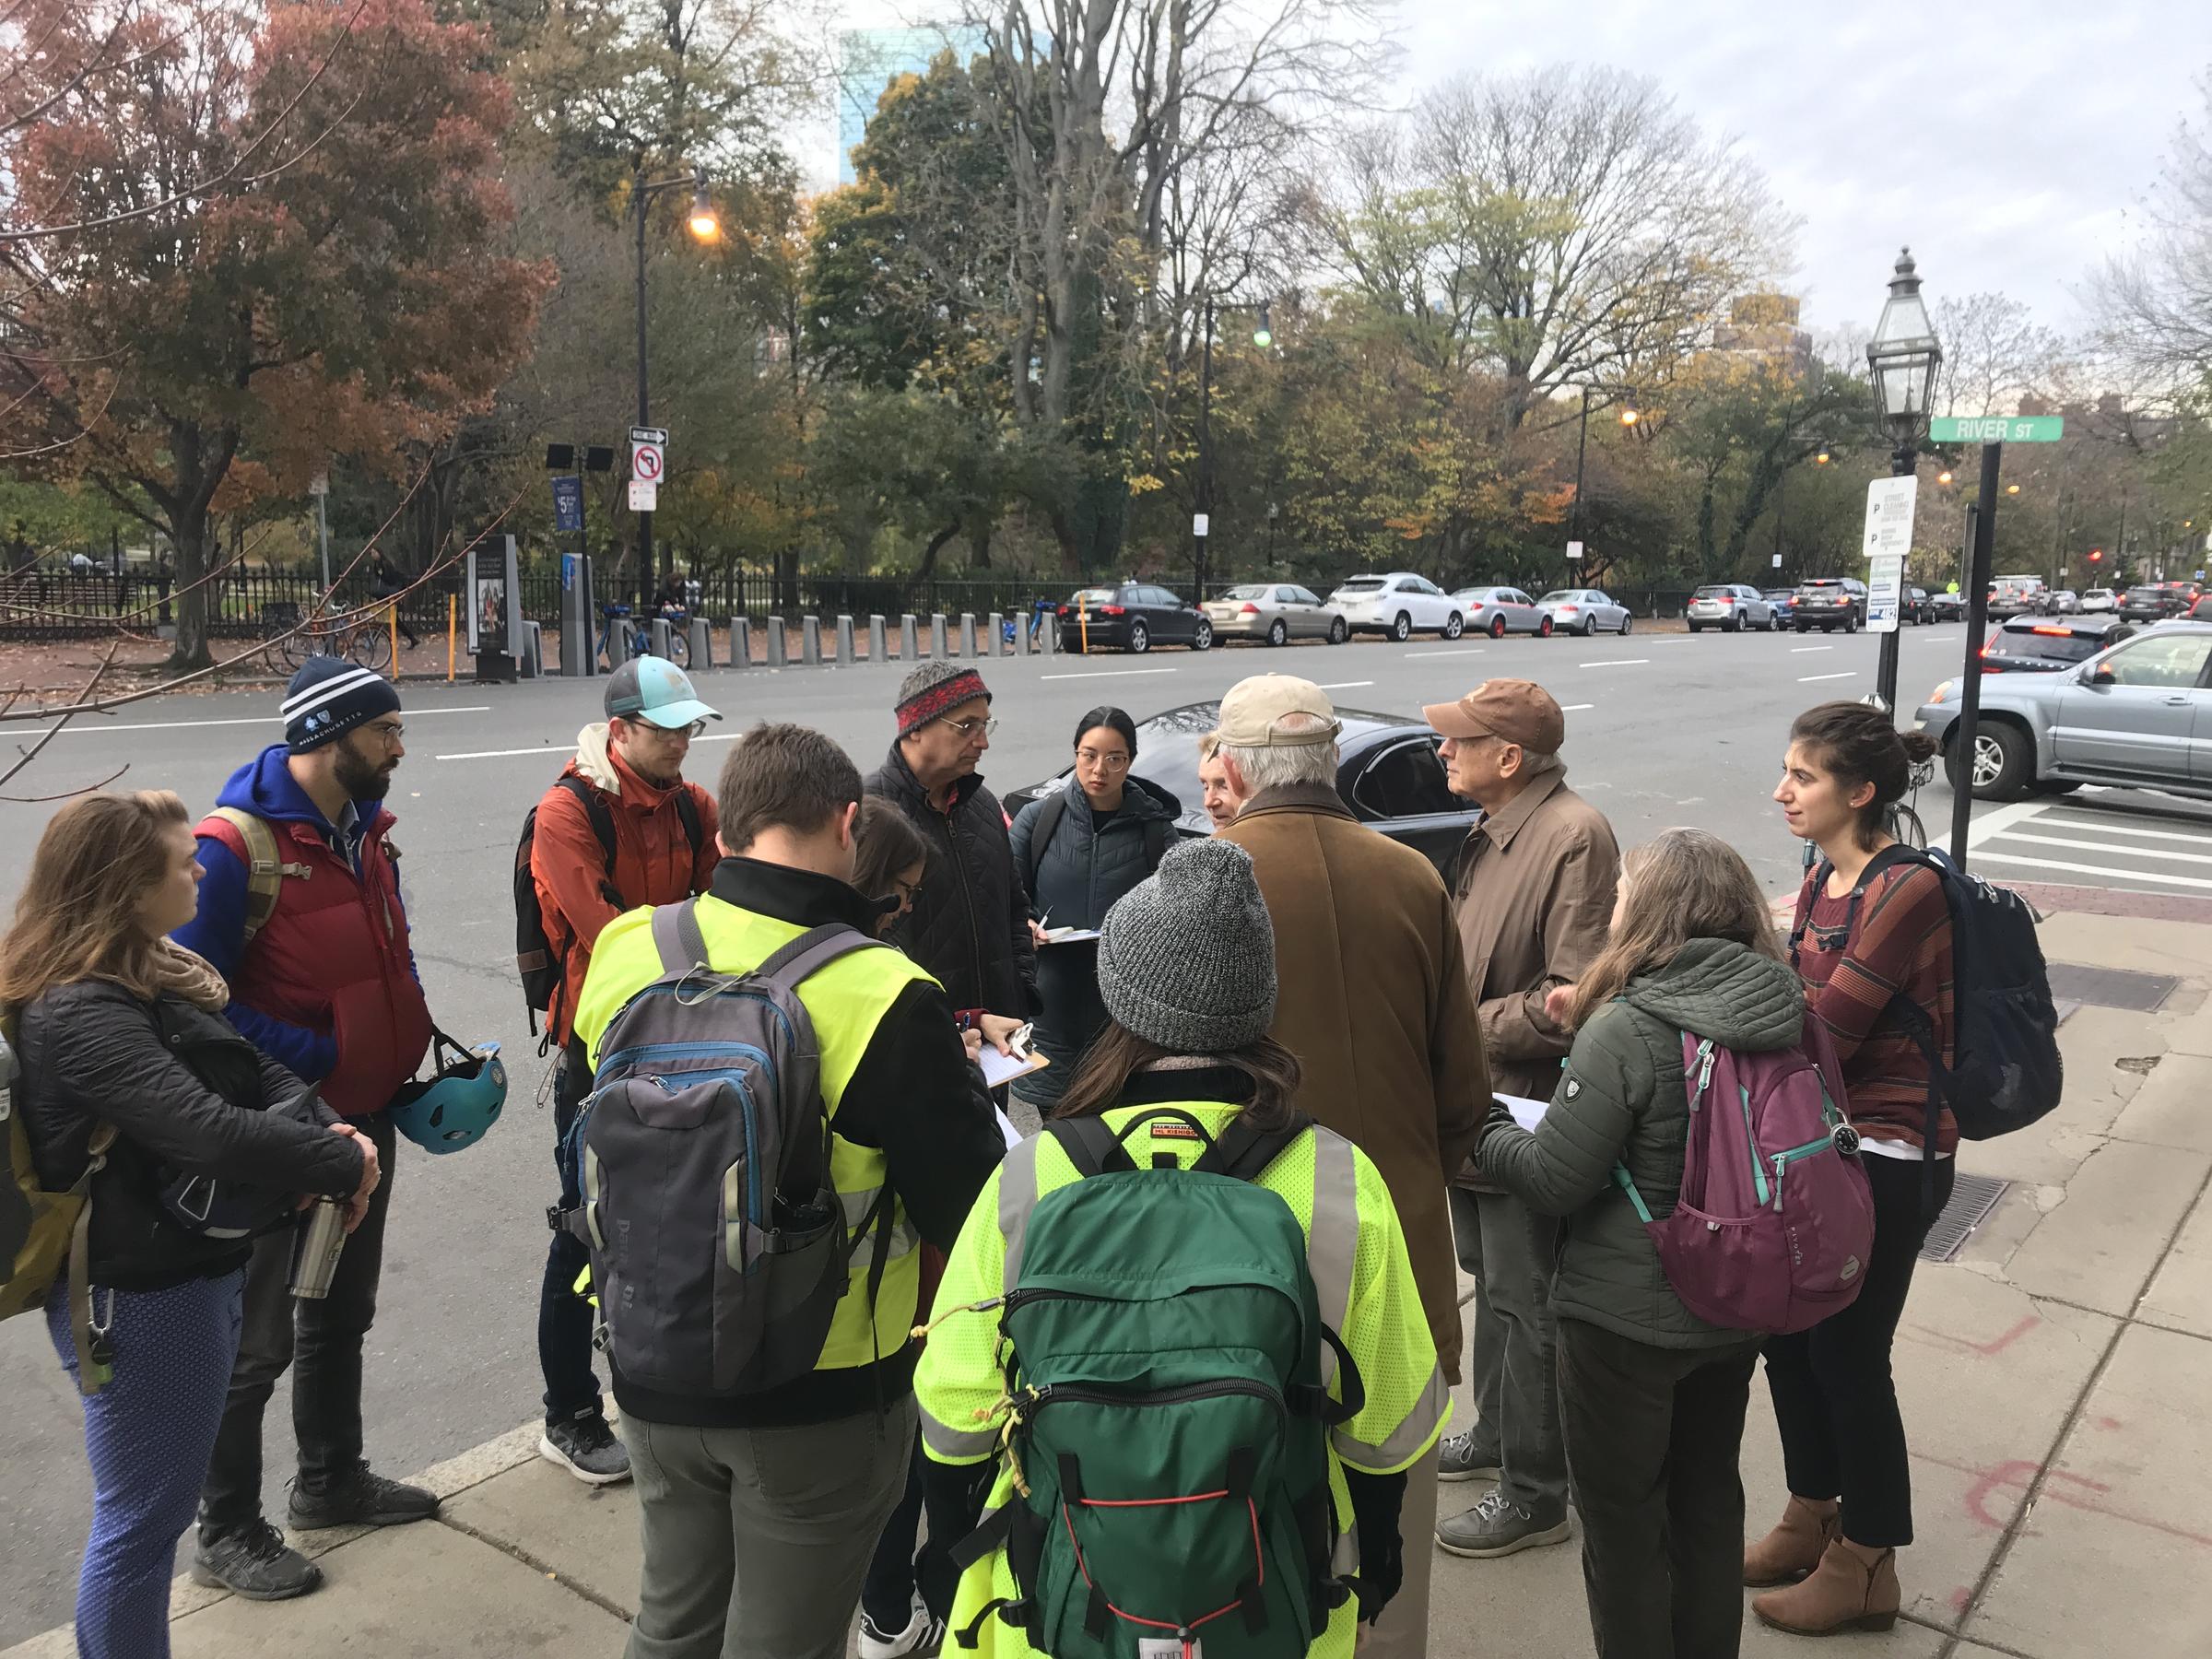 Photo showing participants in the Back Bay Community Walk; about 15 people gathered in a group on a sidewalk.